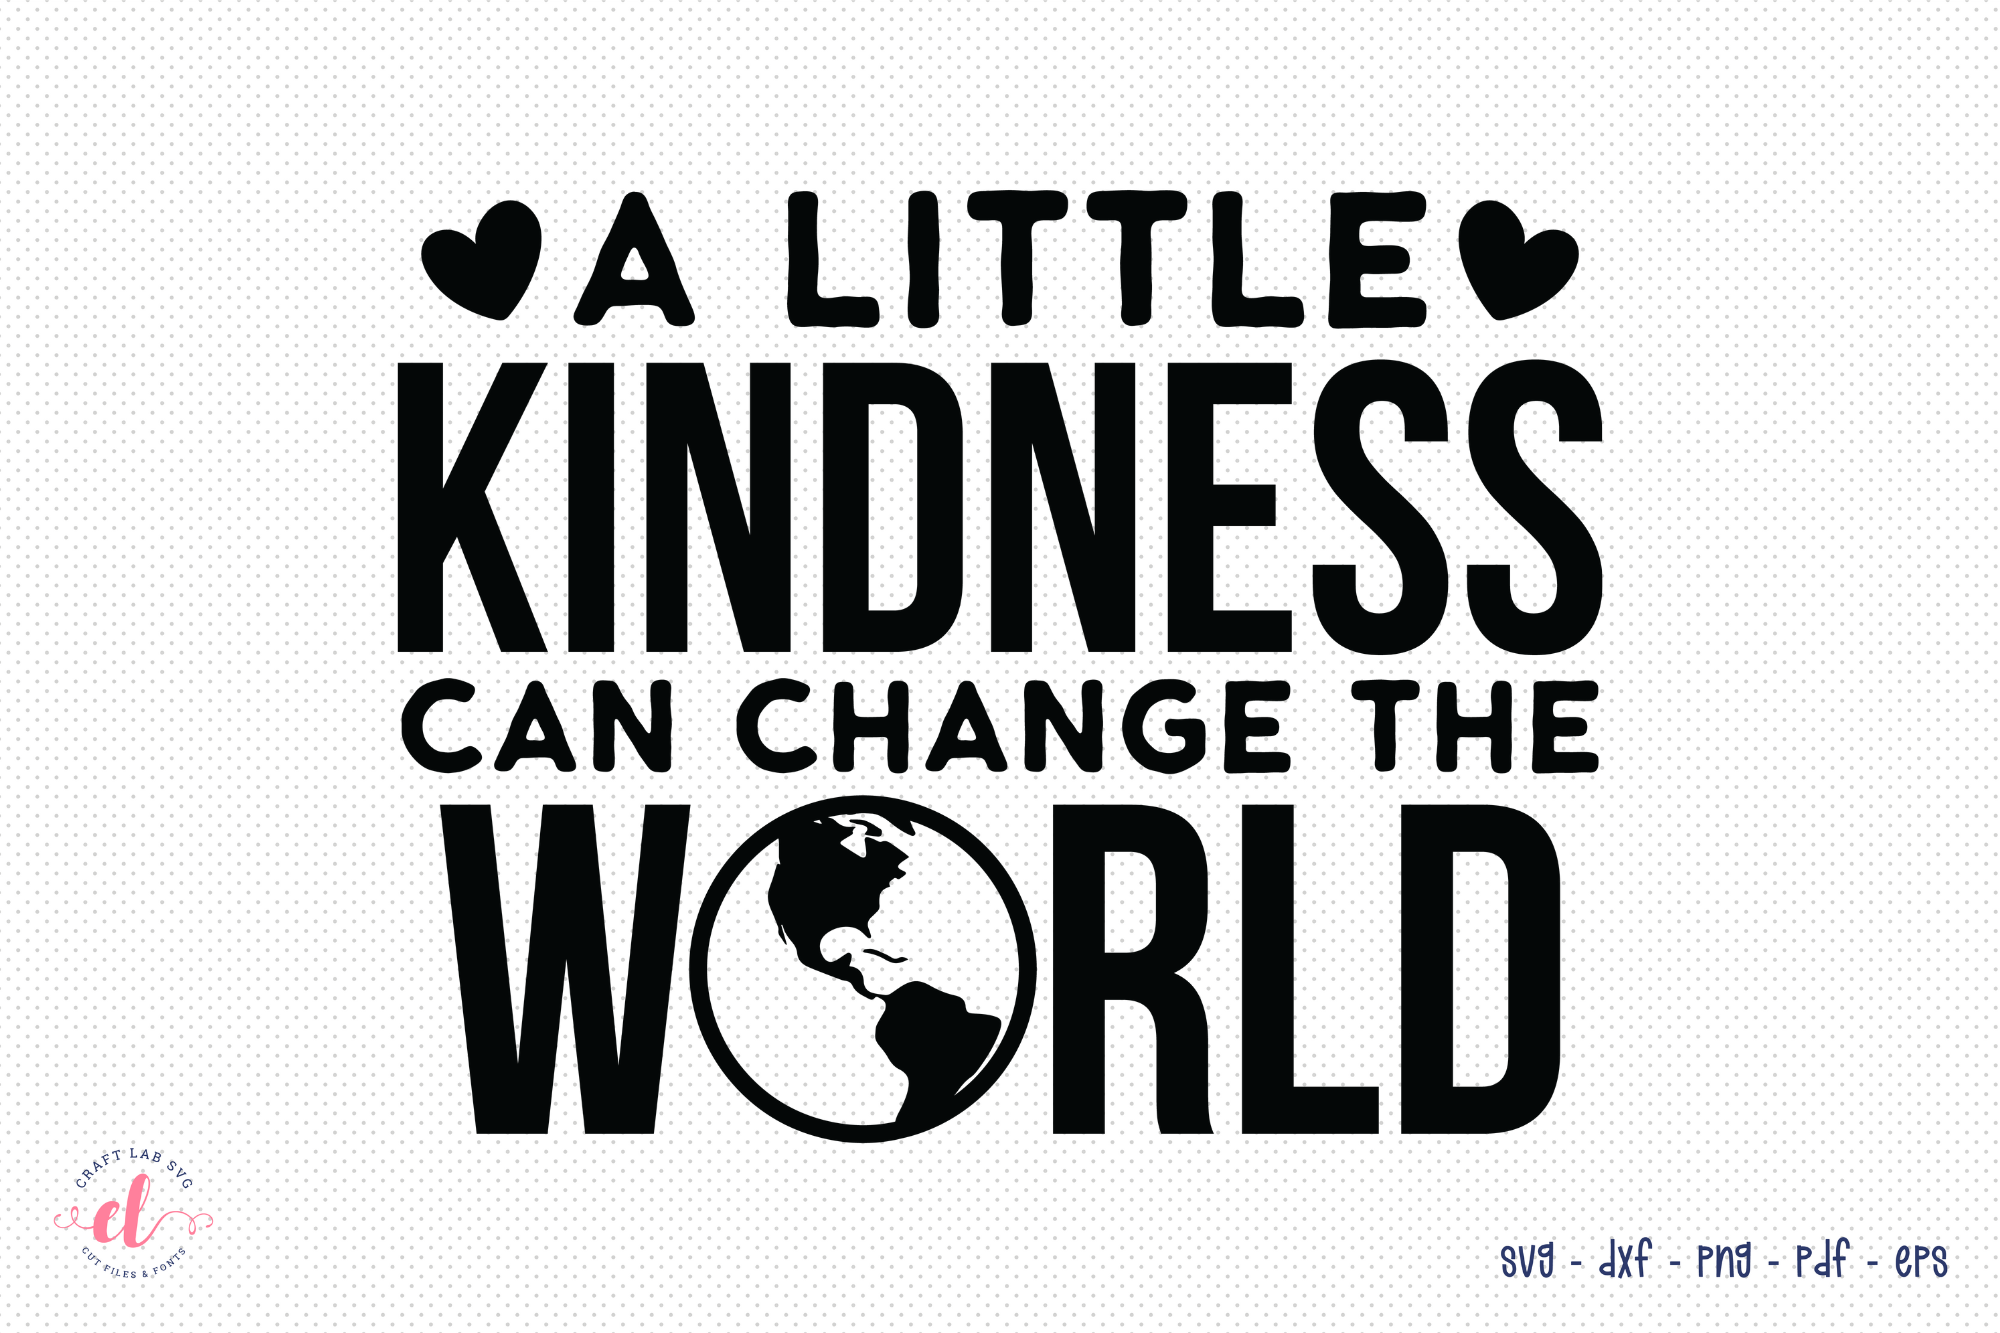 A Little Kindness Can Change the World Graphic by CraftlabSVG ...